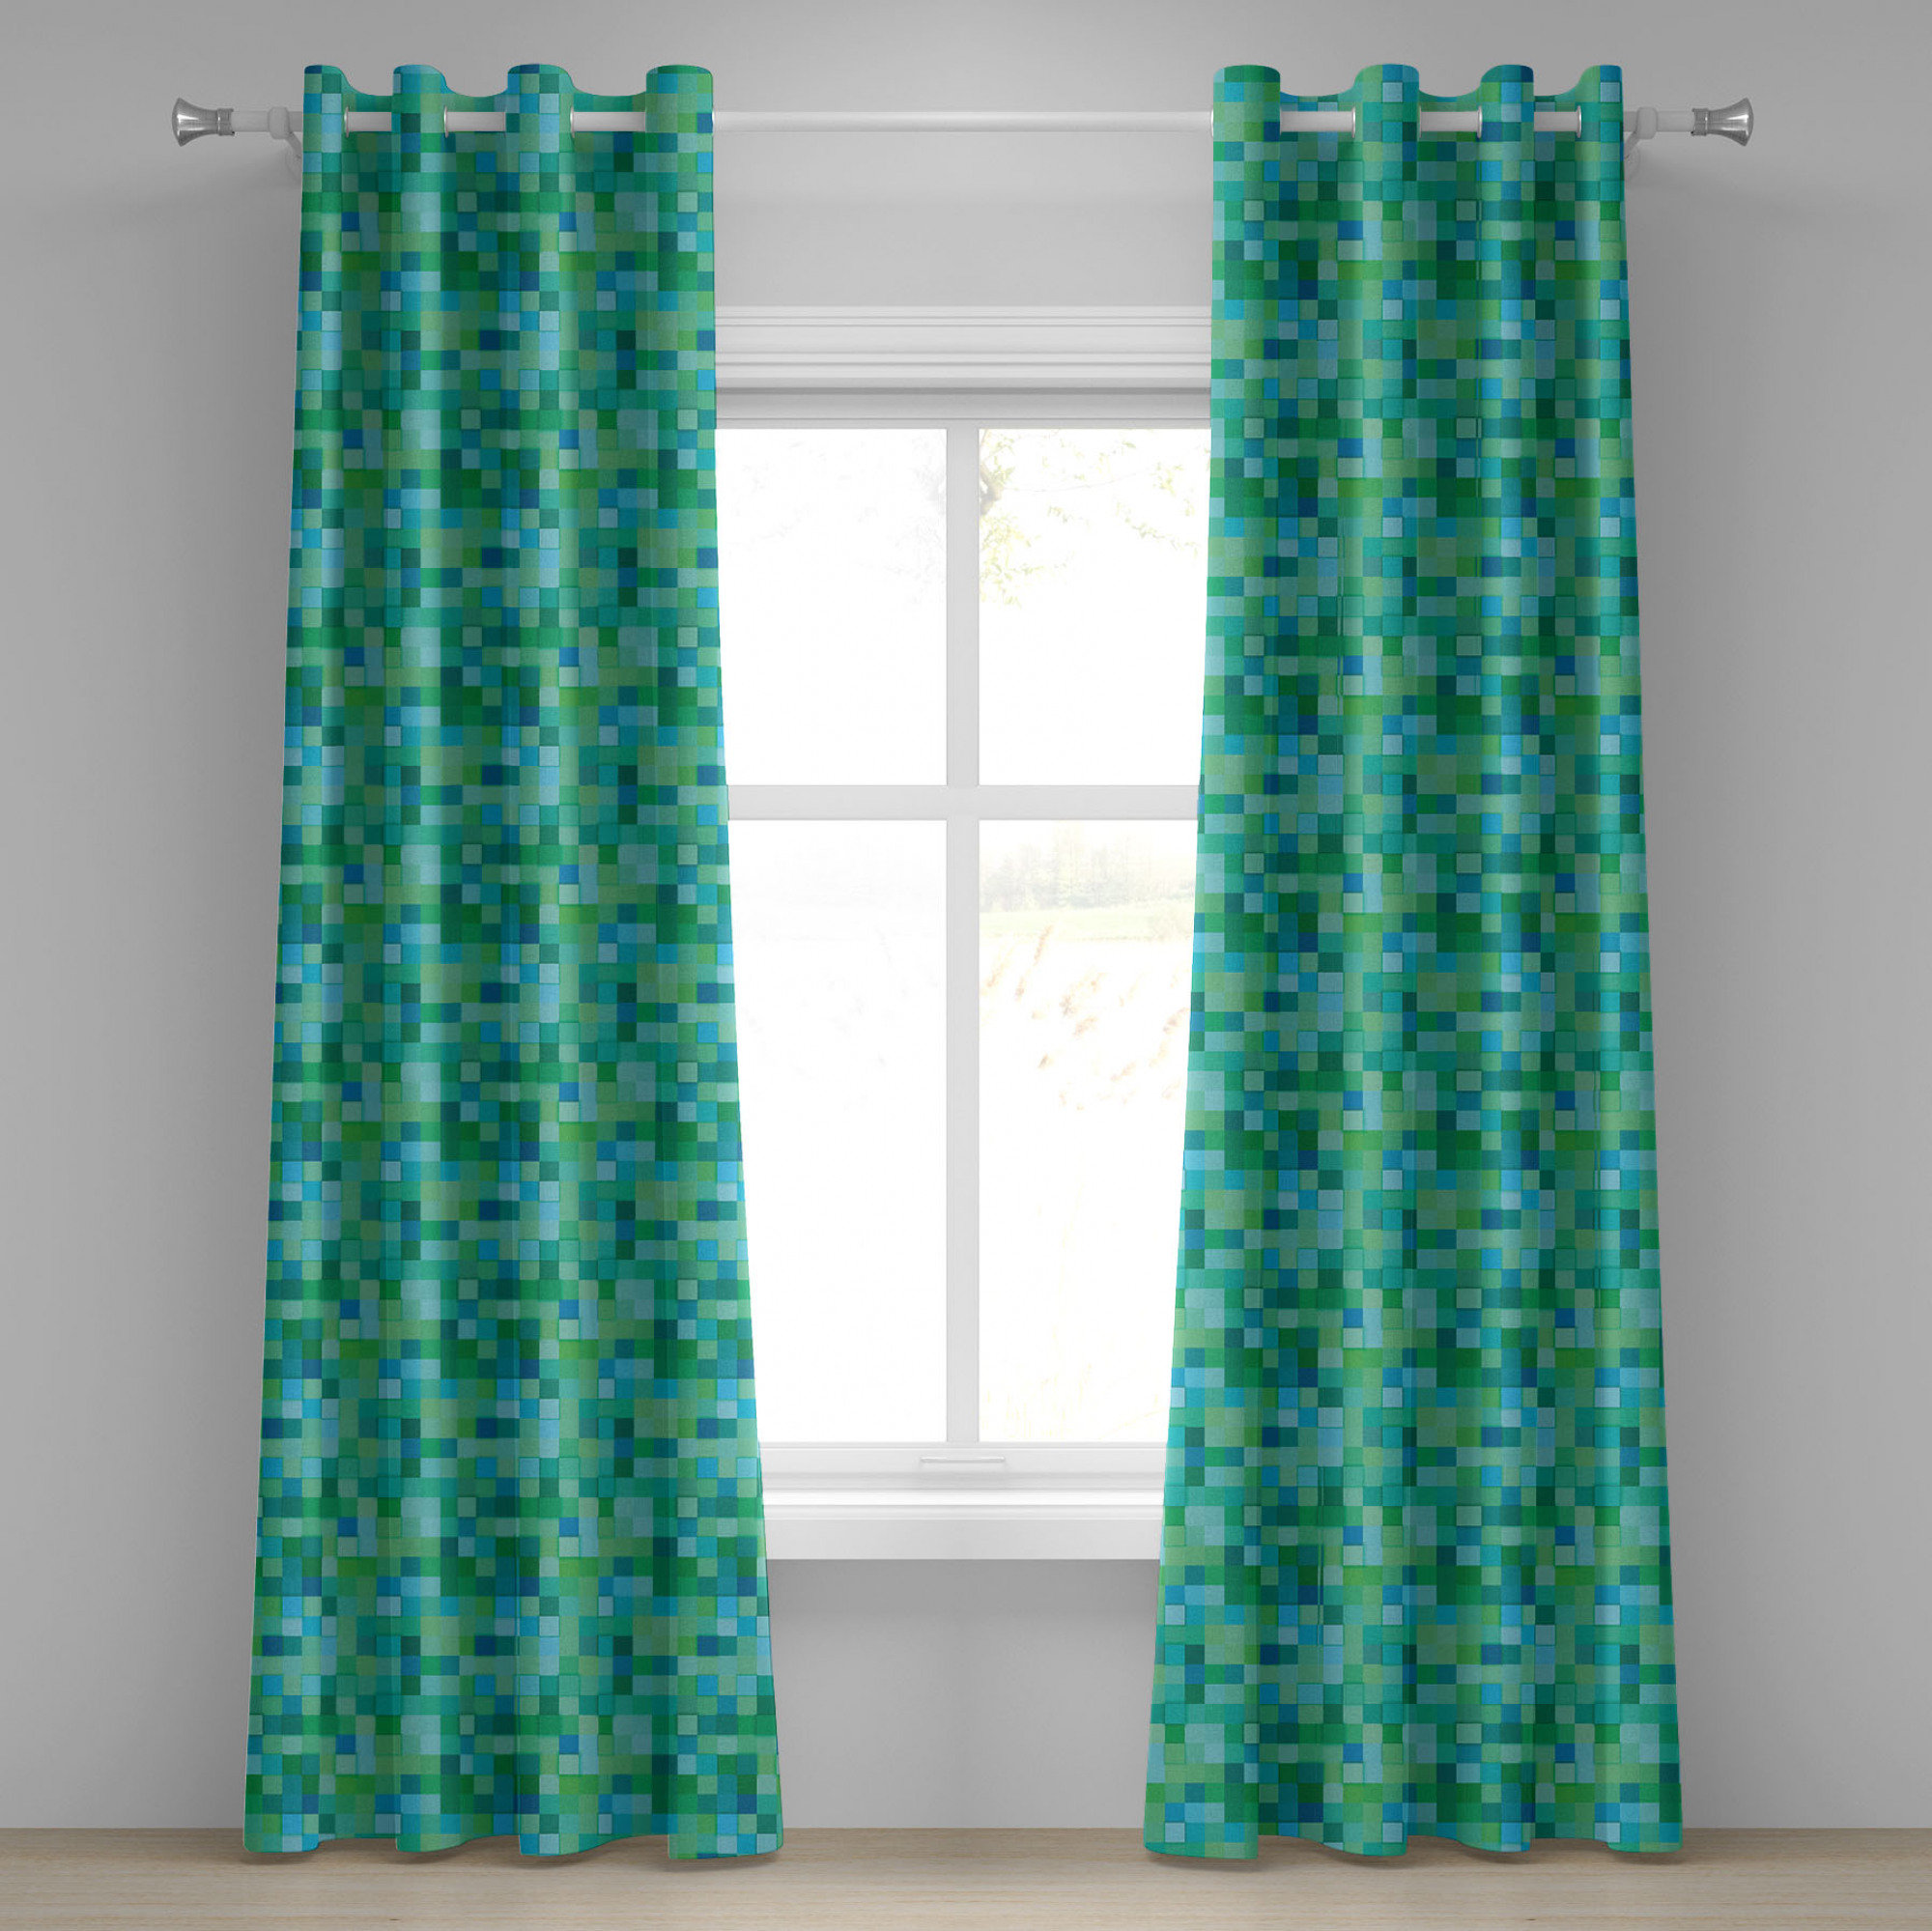 1-Panel Pack Paige Geometric Grommet Window Curtains Yellow Curtains For Living room Transitional Curtains For Bedroom 50X63